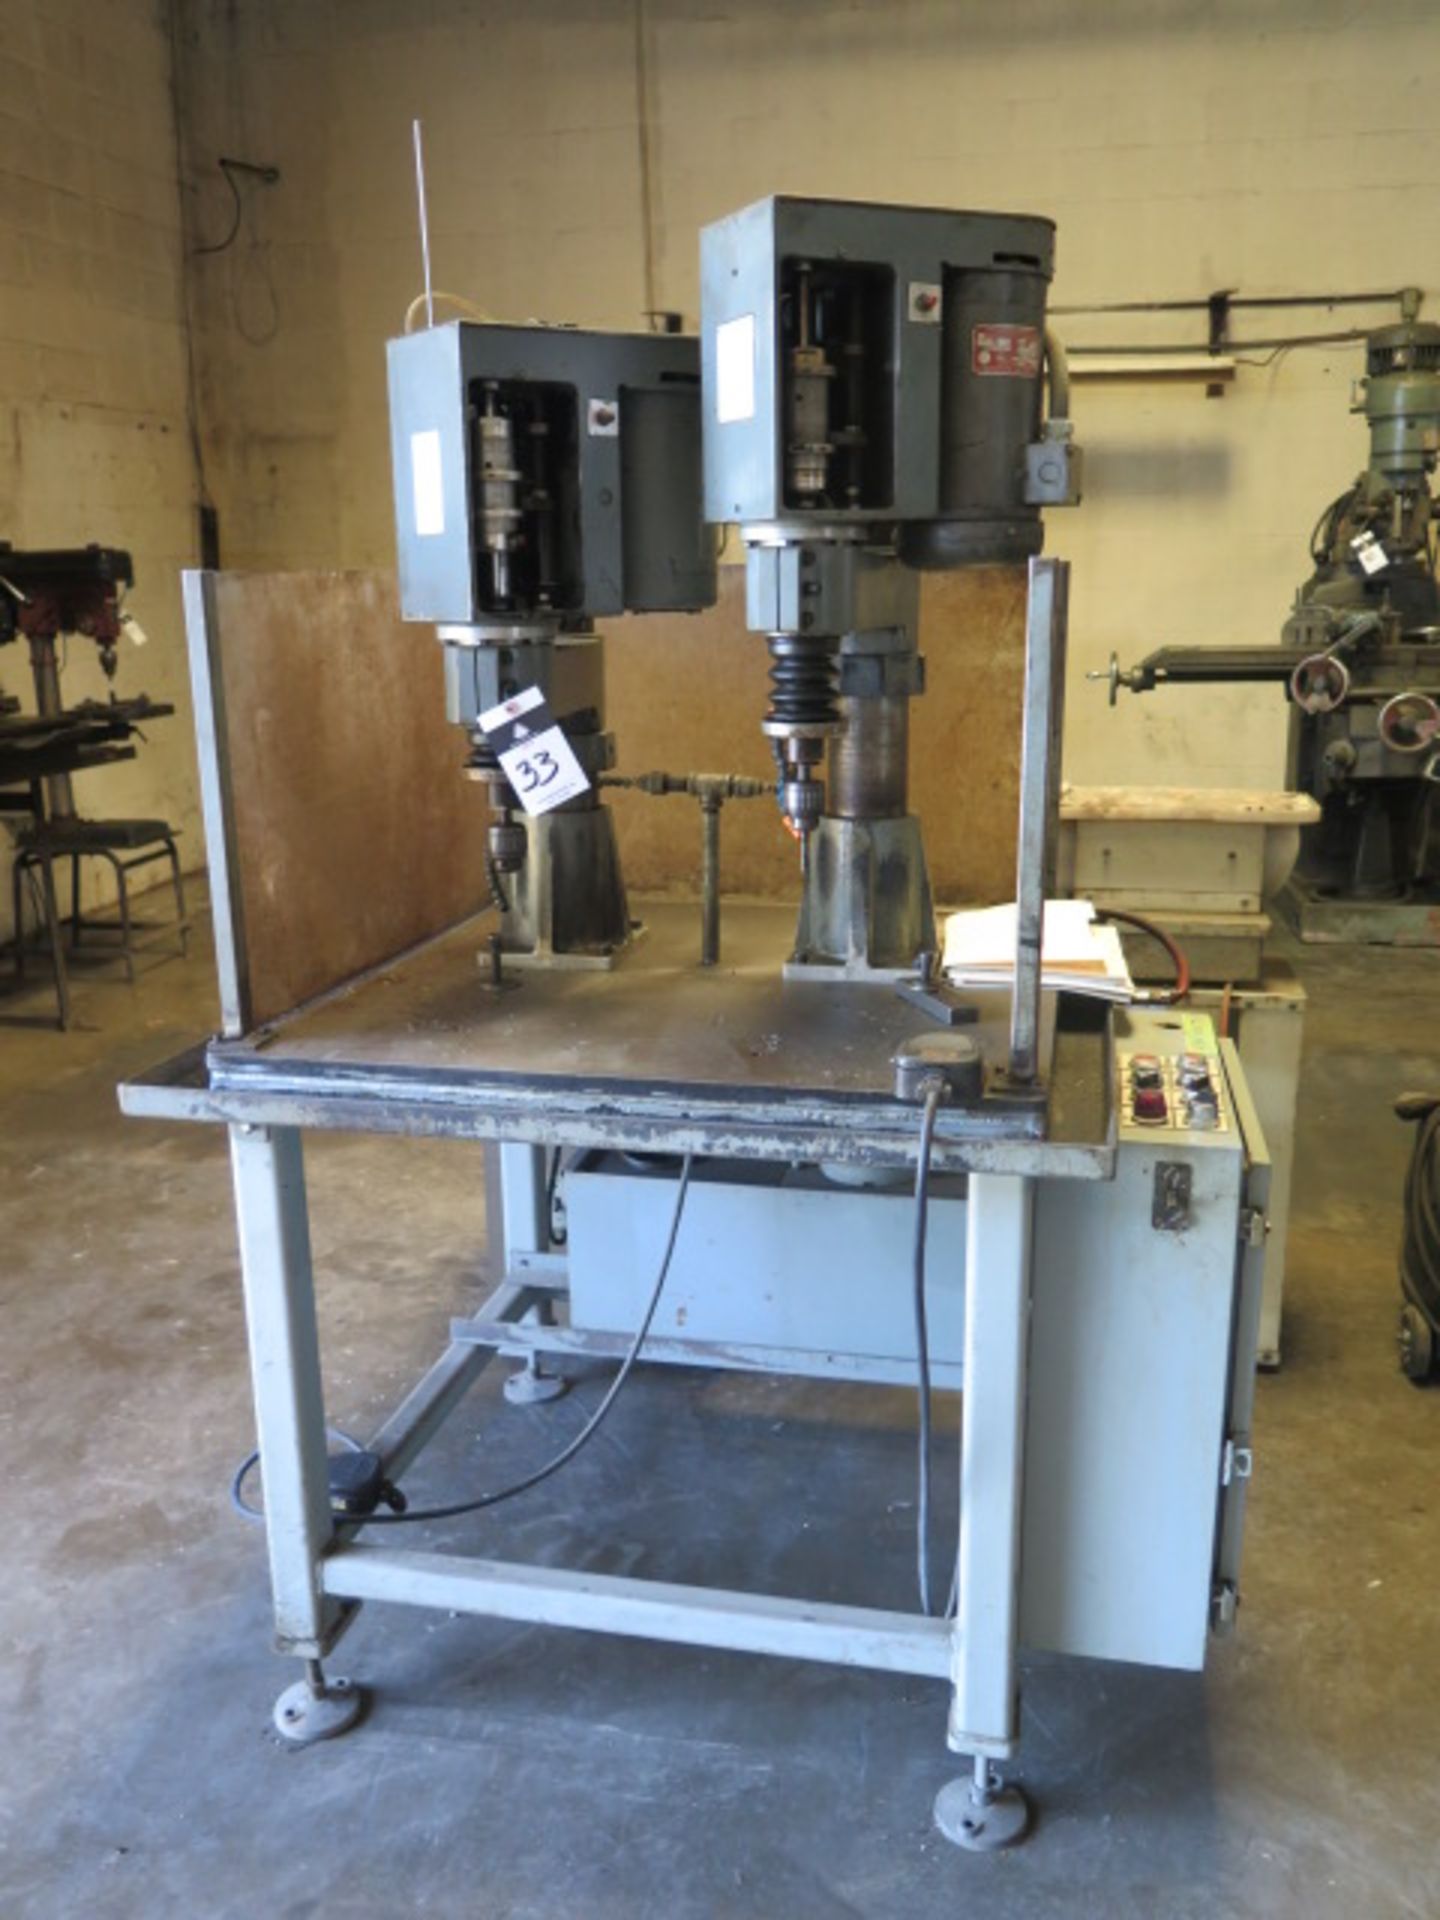 Dumore 2-Head Automatic Drilling/Tapping Machine w/ Dumore Pneumatic Heads, 17” x 36” Table